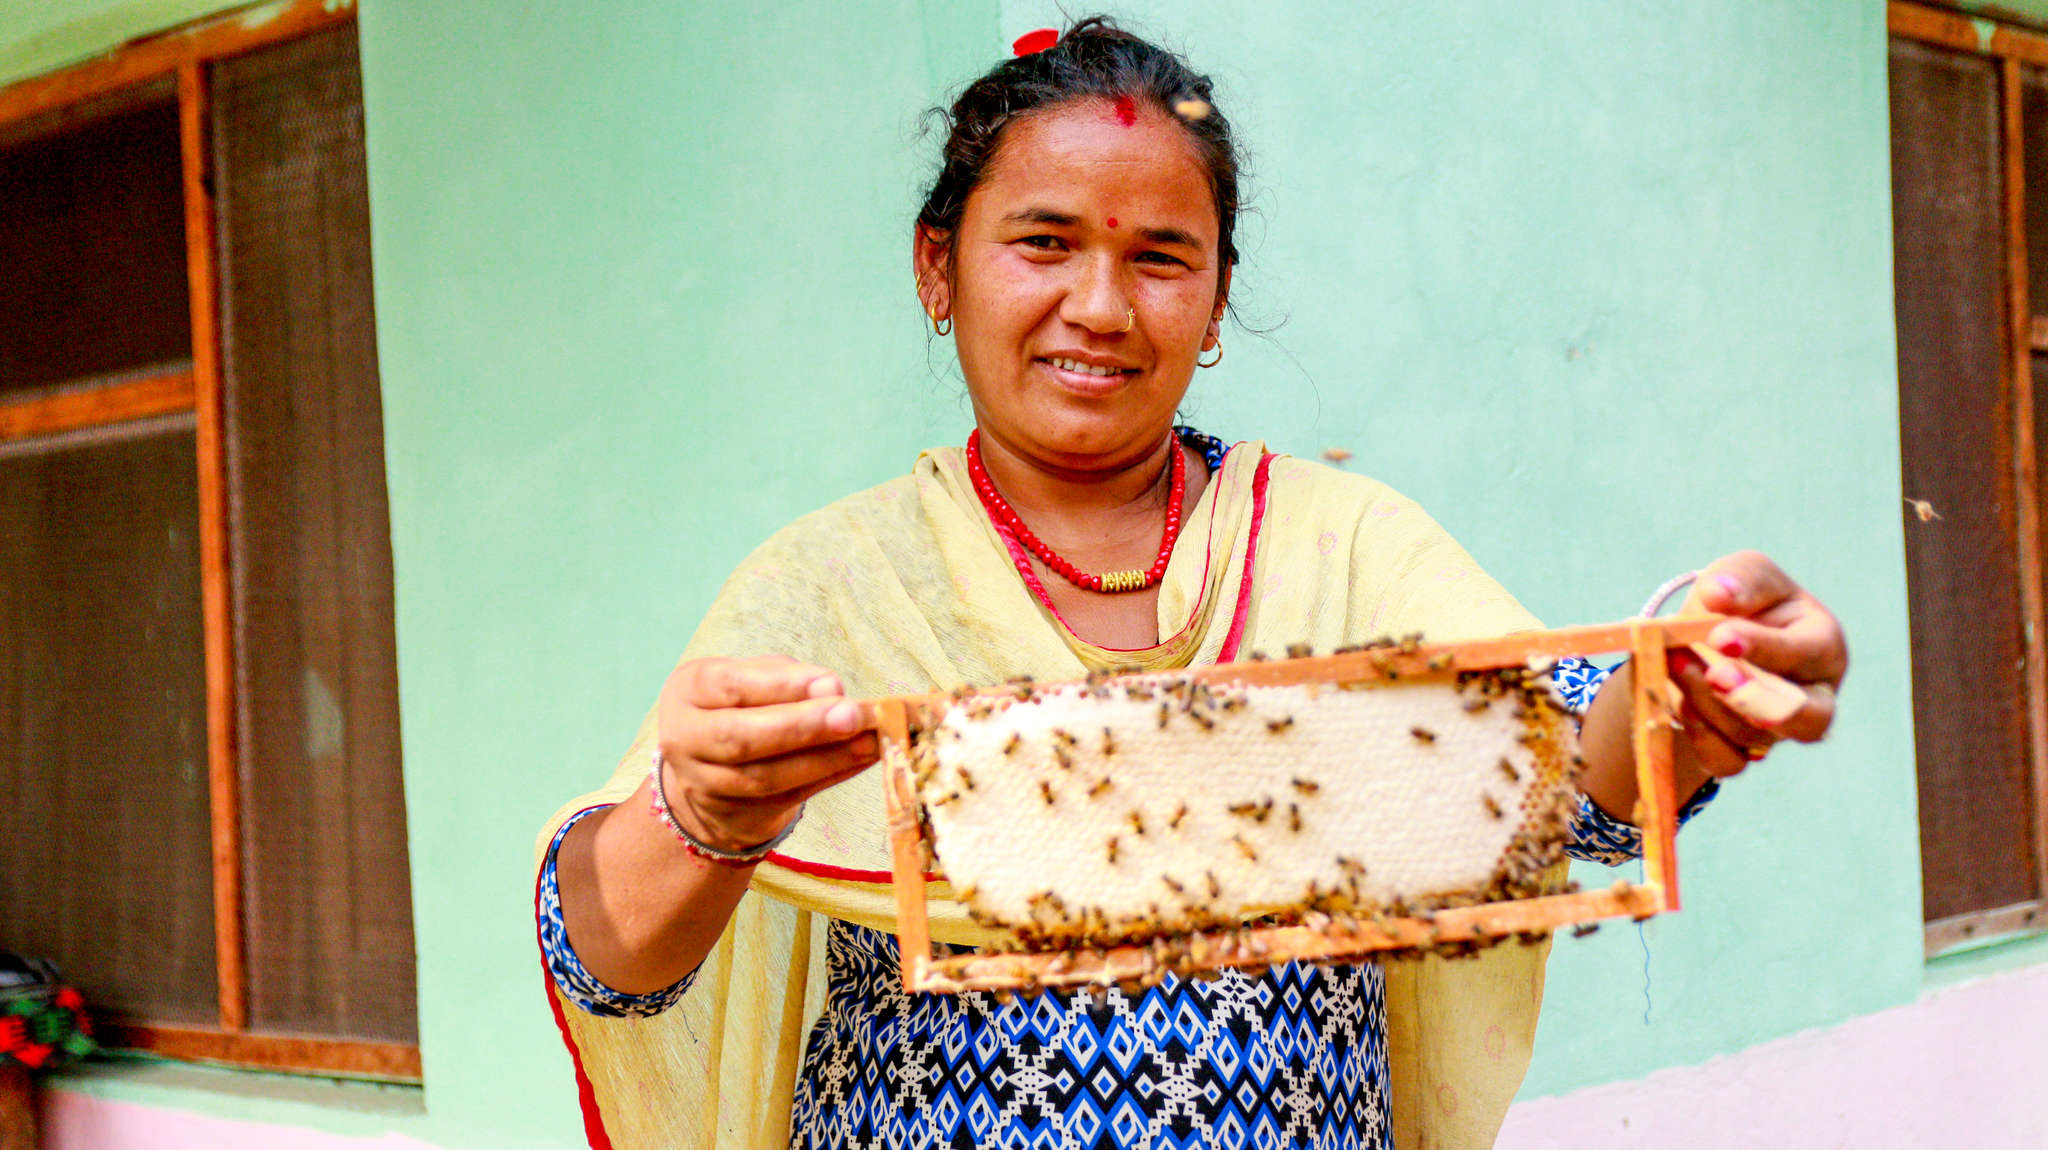 A person holding a honeycomb.